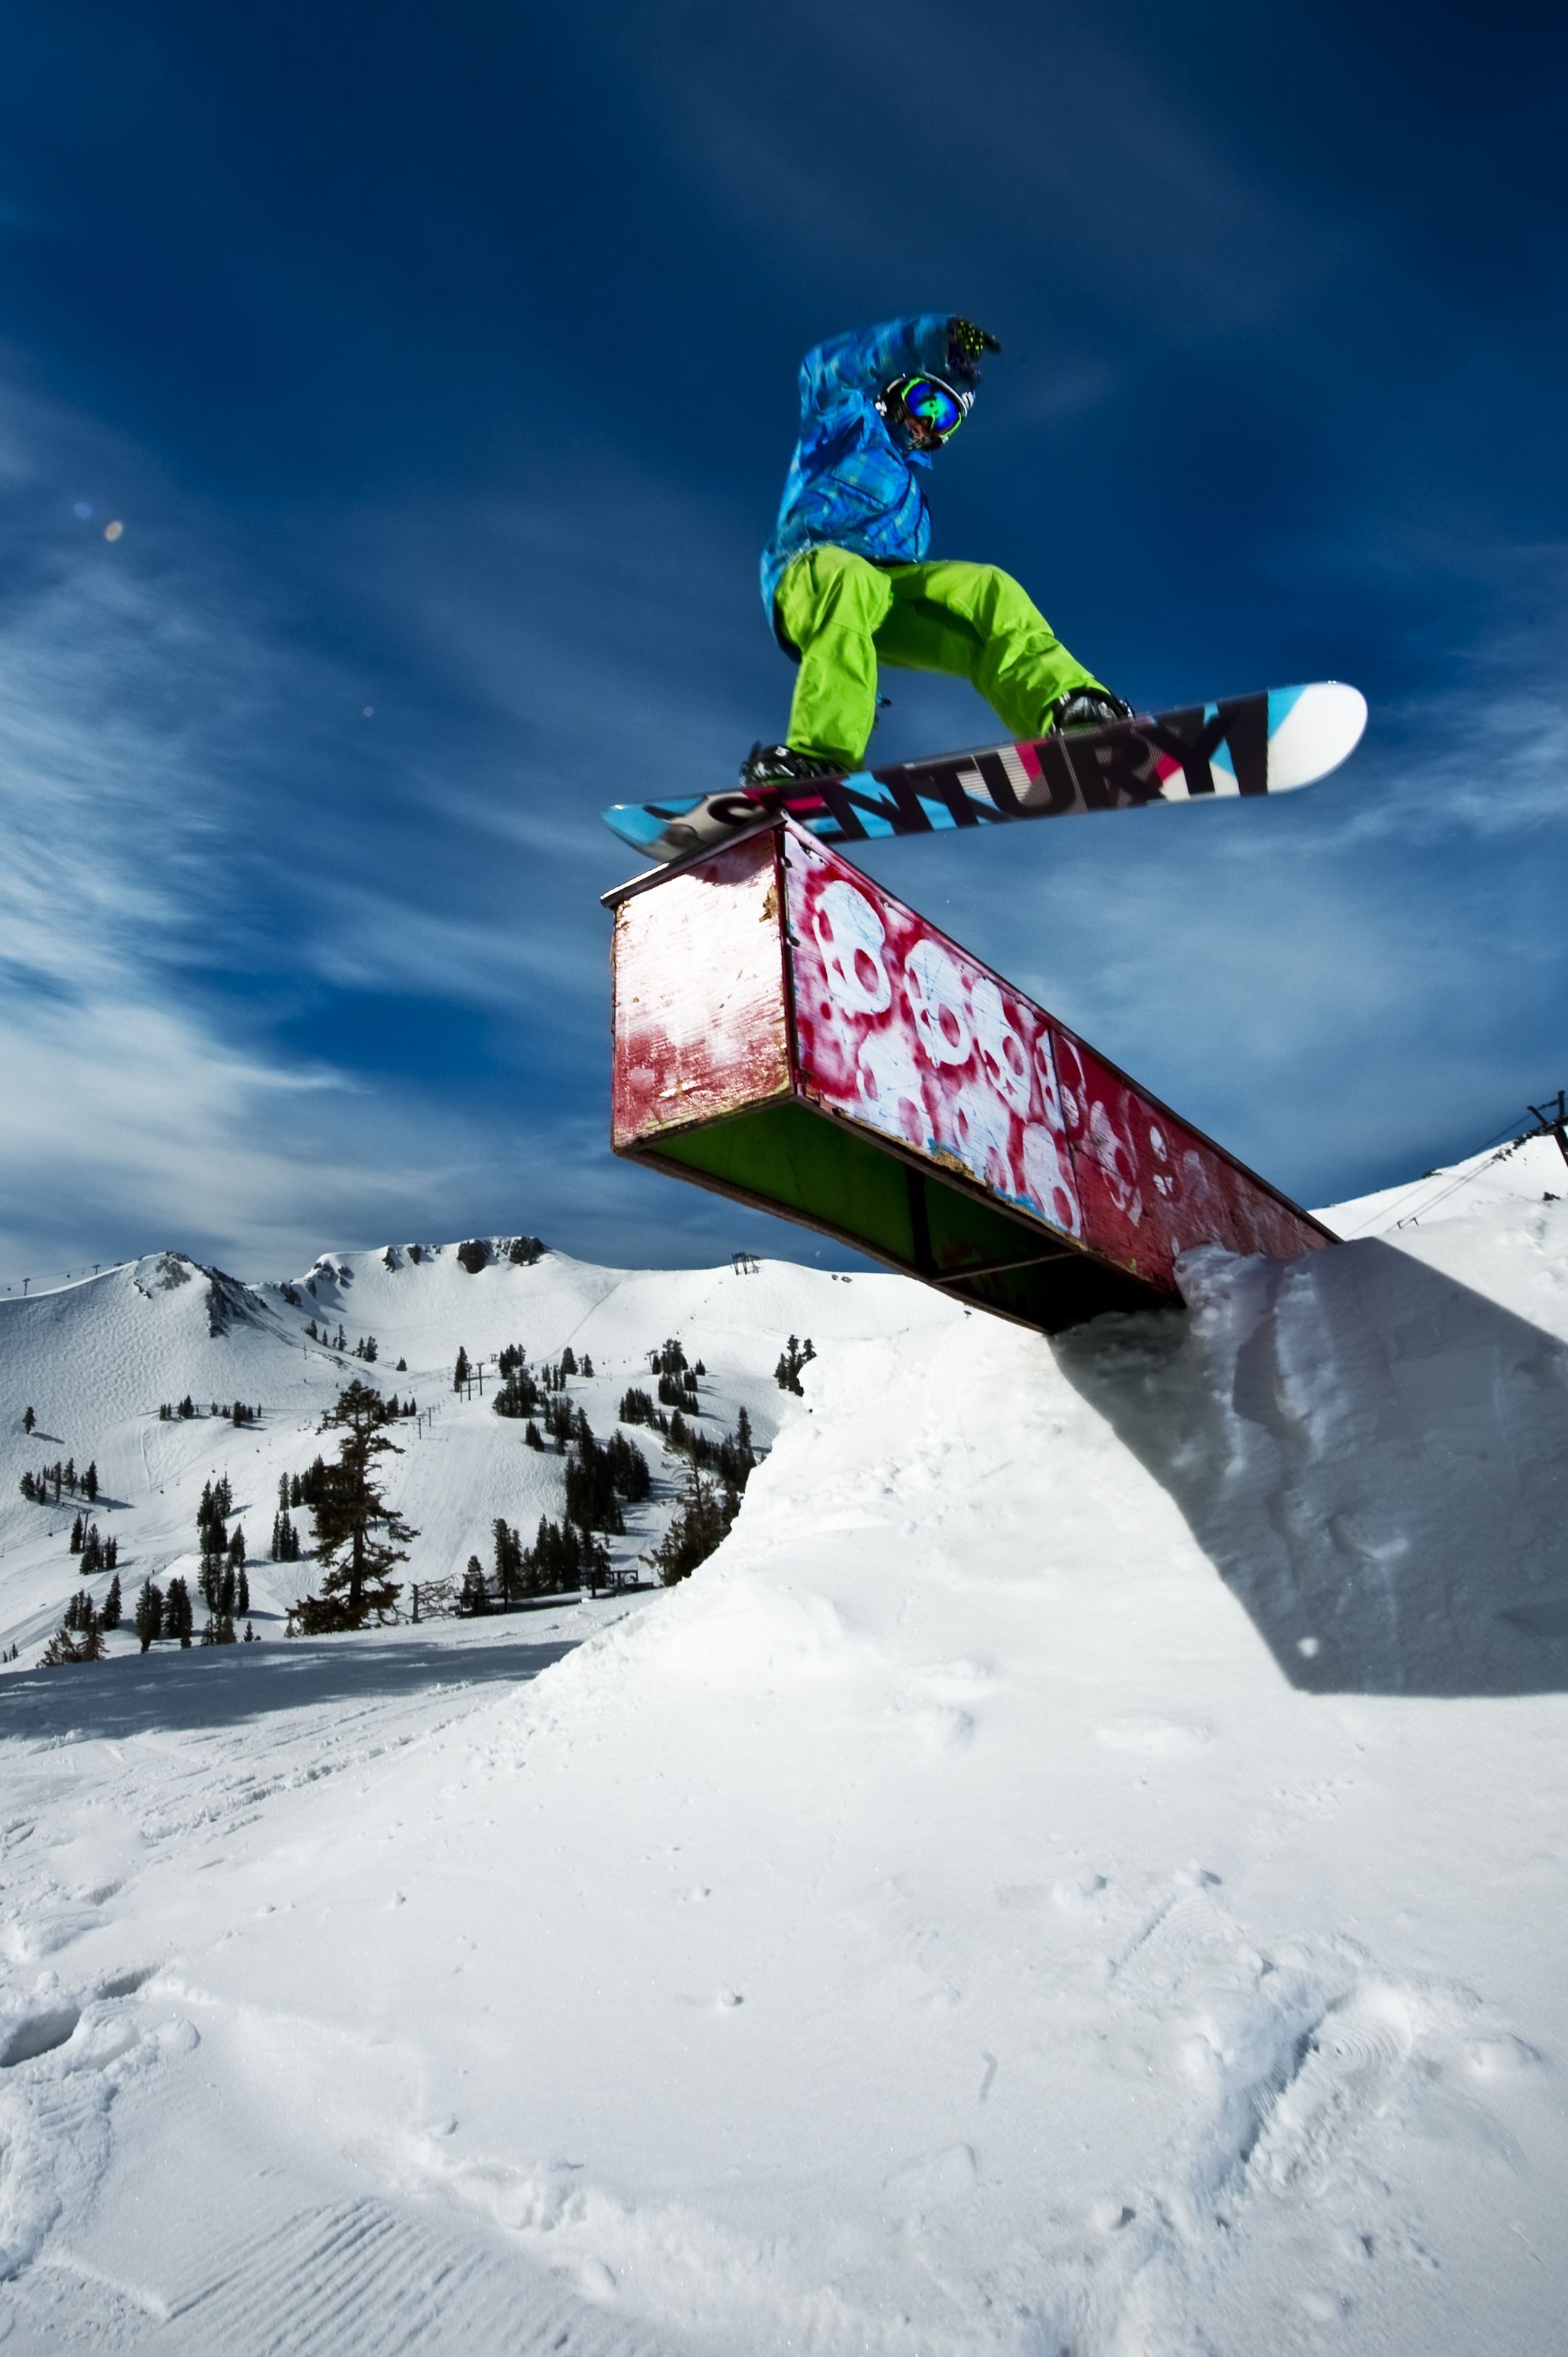 Terrain Parks At Squaw